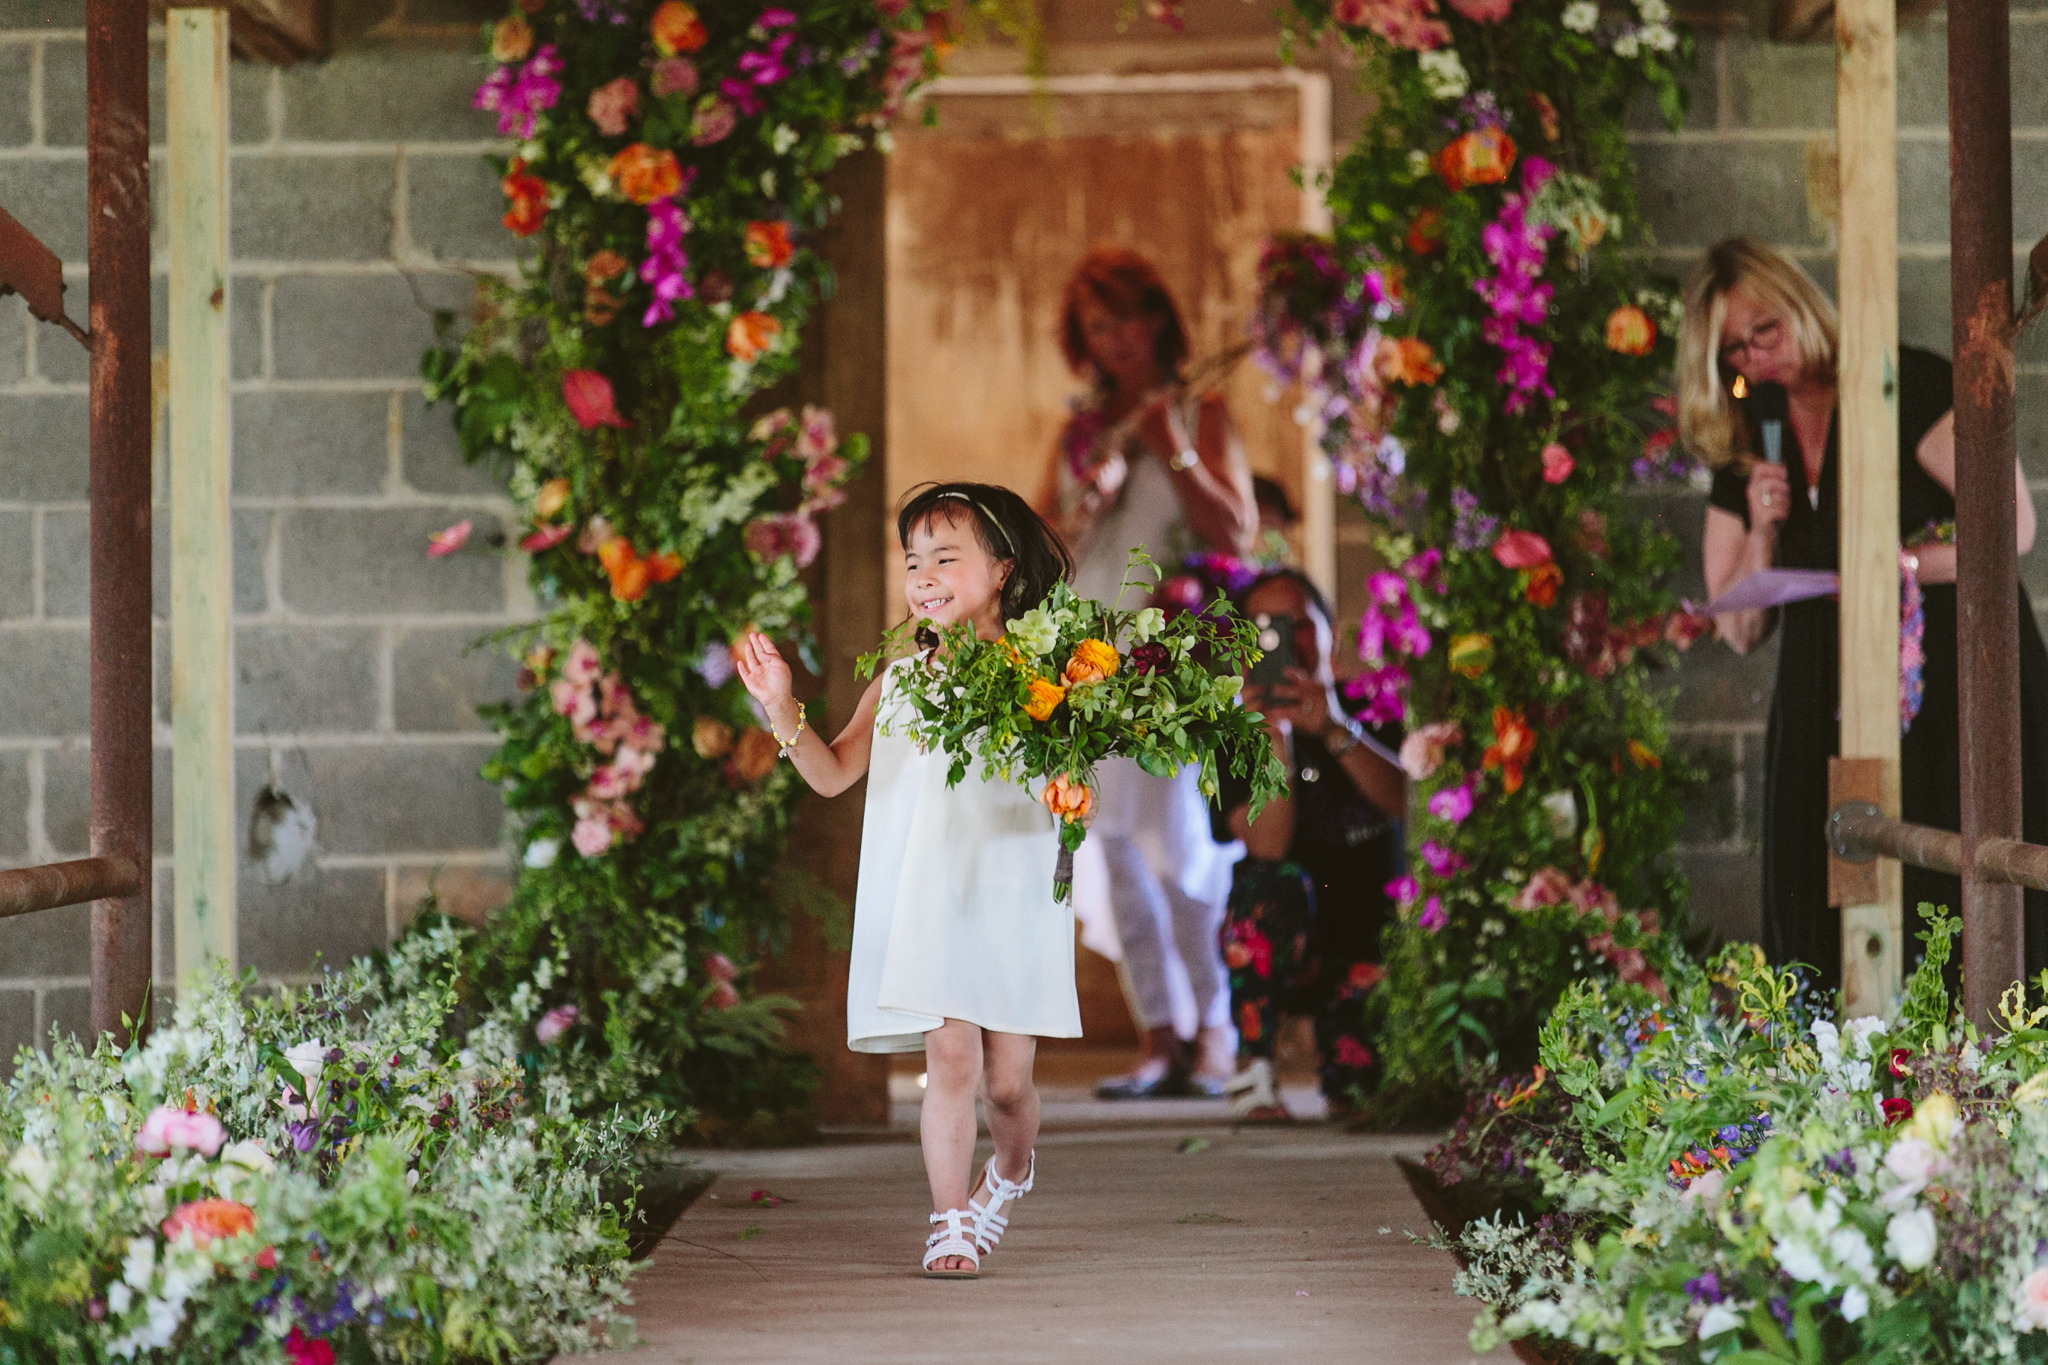  Little one having a blast. I see a proud mom in the background capturing the moment. Bouquet by Jaclyn Millonzi of  Feisty Flowers  in Milwaukee. 